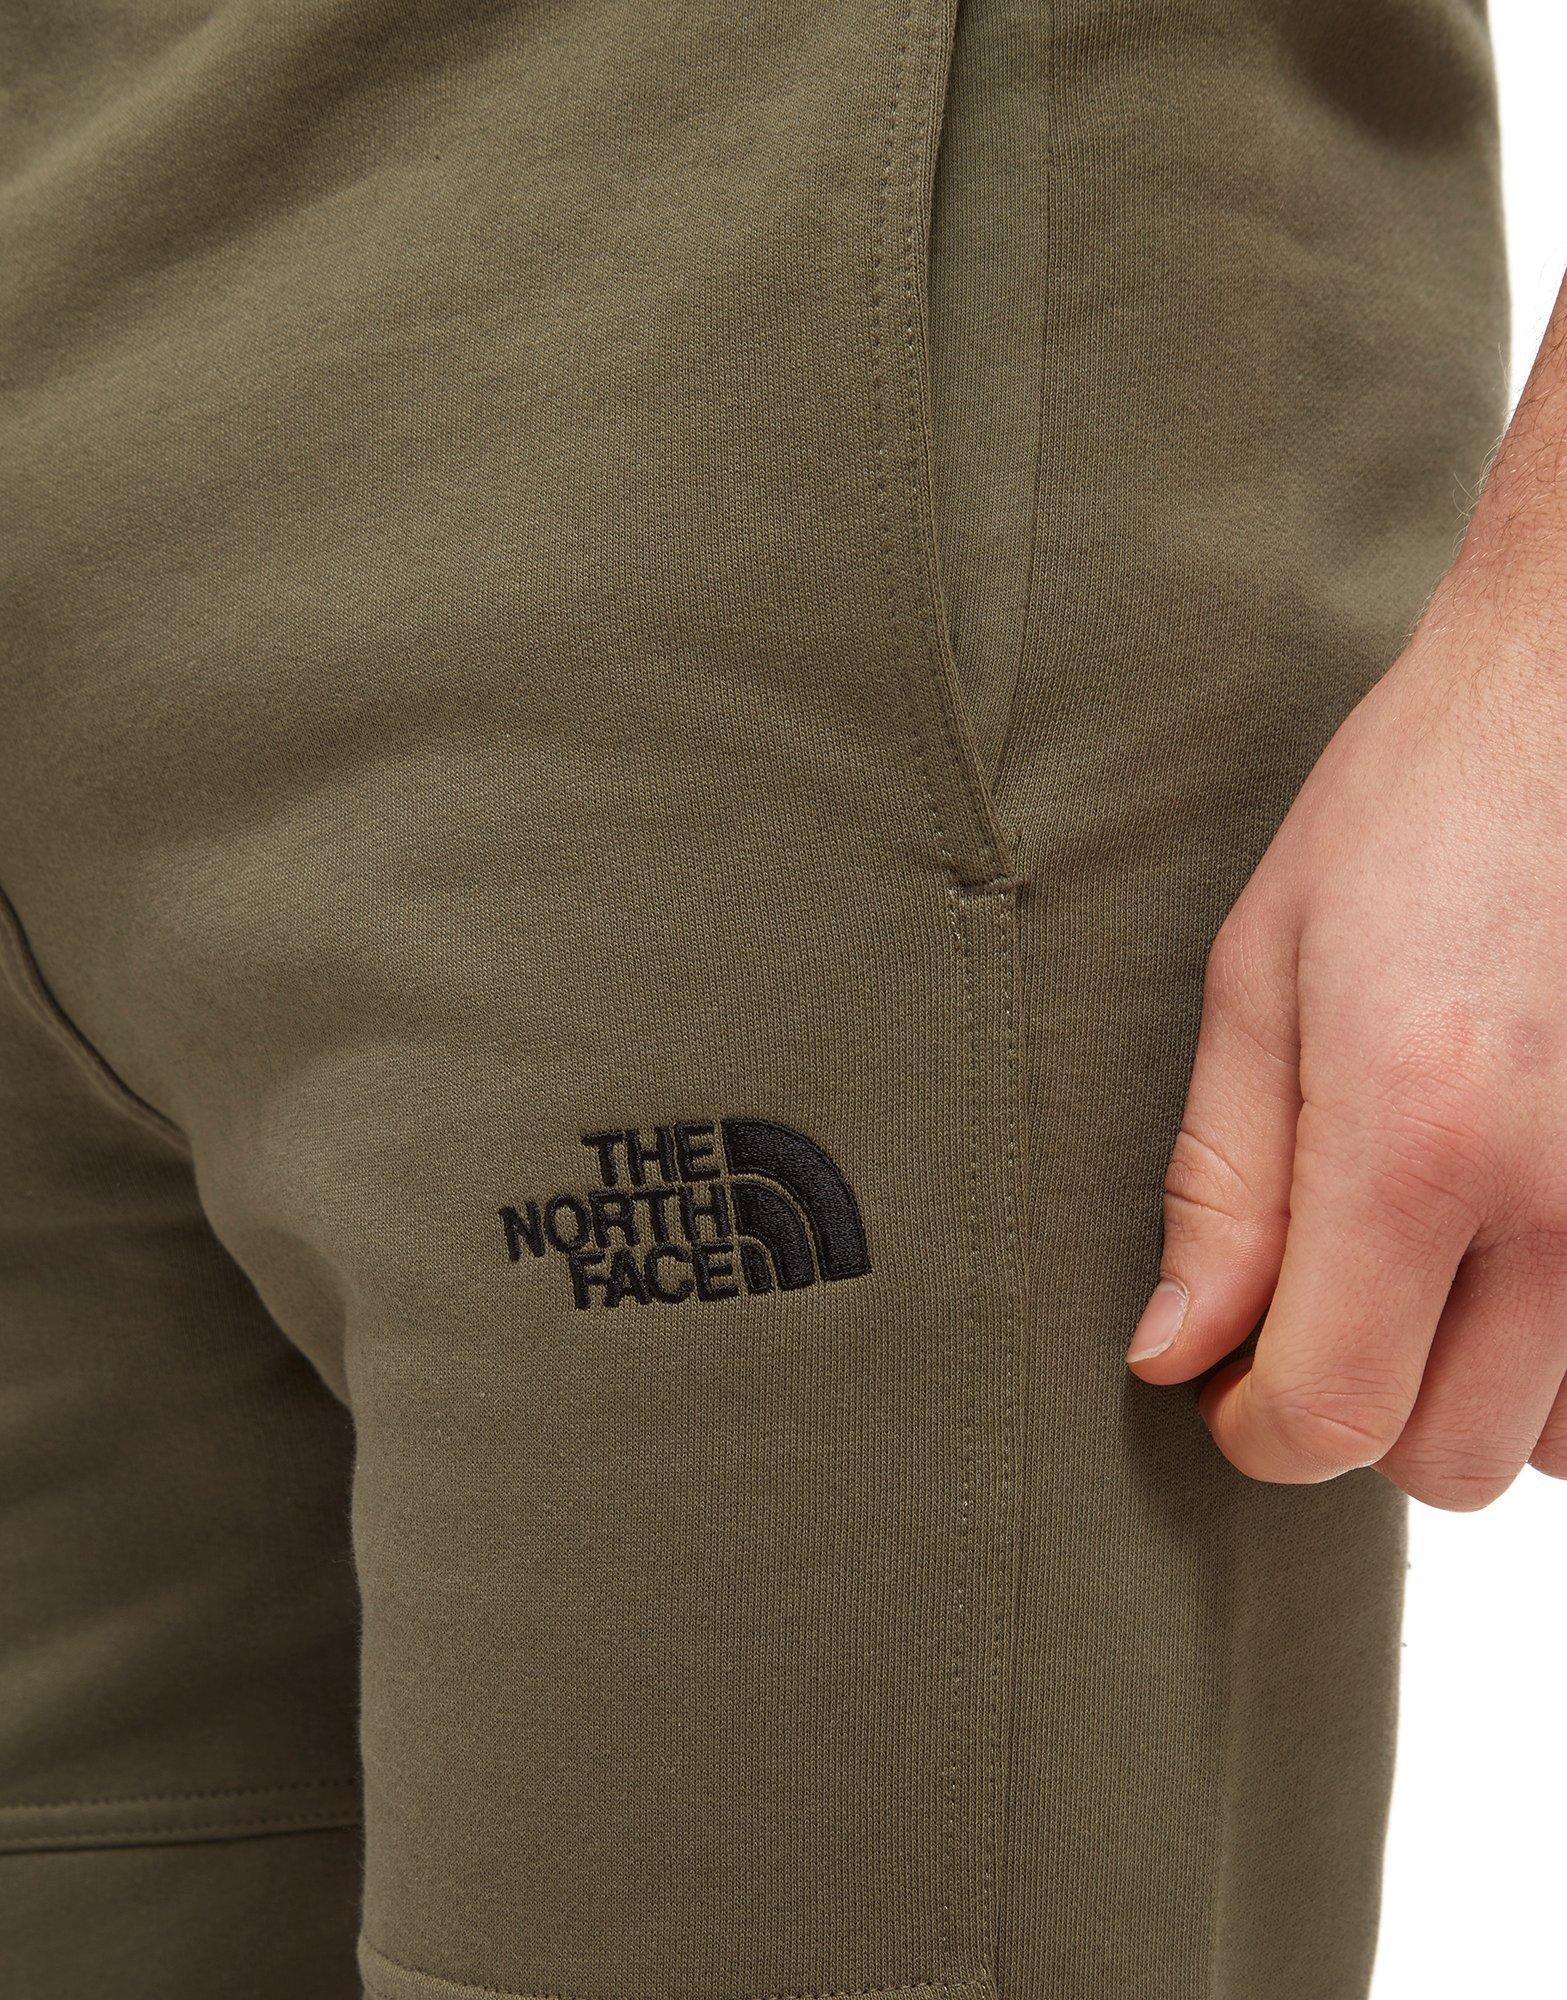 the north face drew pants